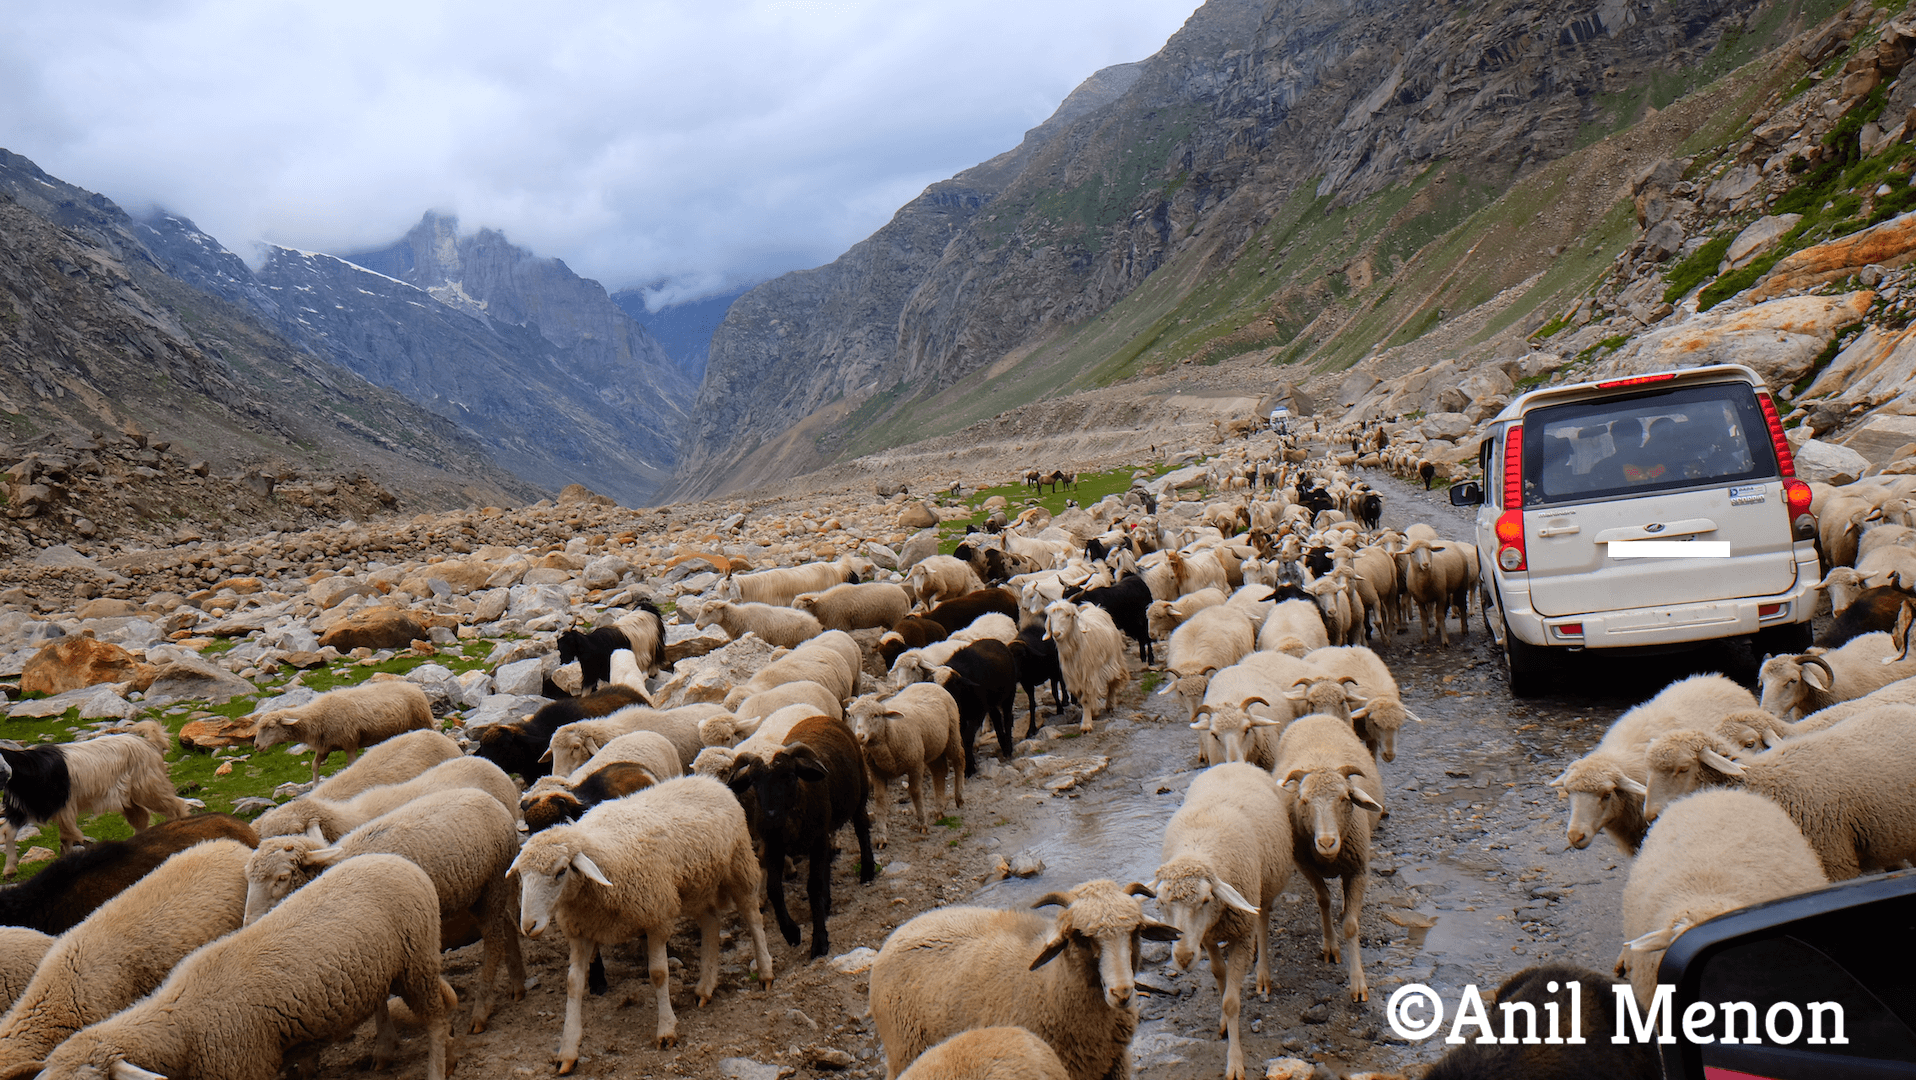 Sheep obstructing cars in the middle of nowhere in the Himalayas in India